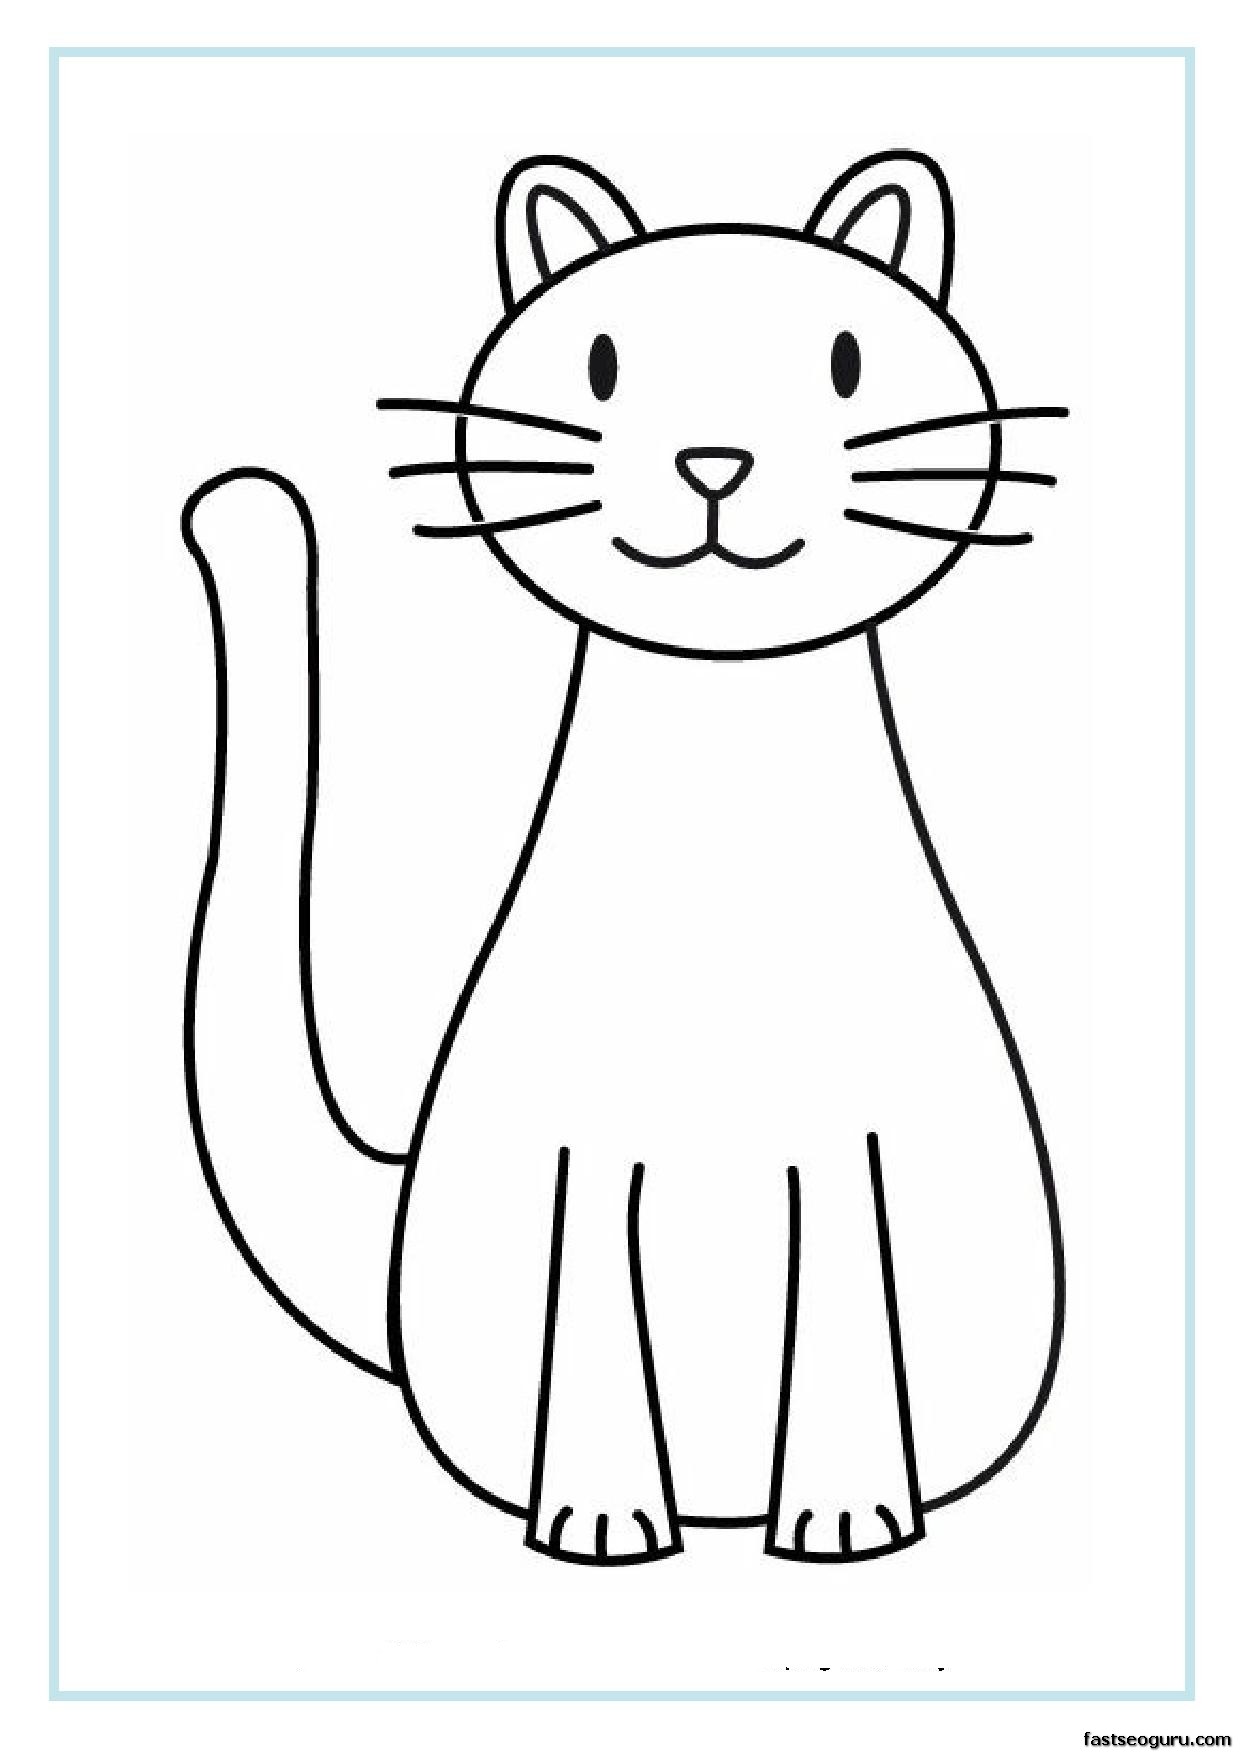 Cat Coloring Pages Free Printable | Coloring Page